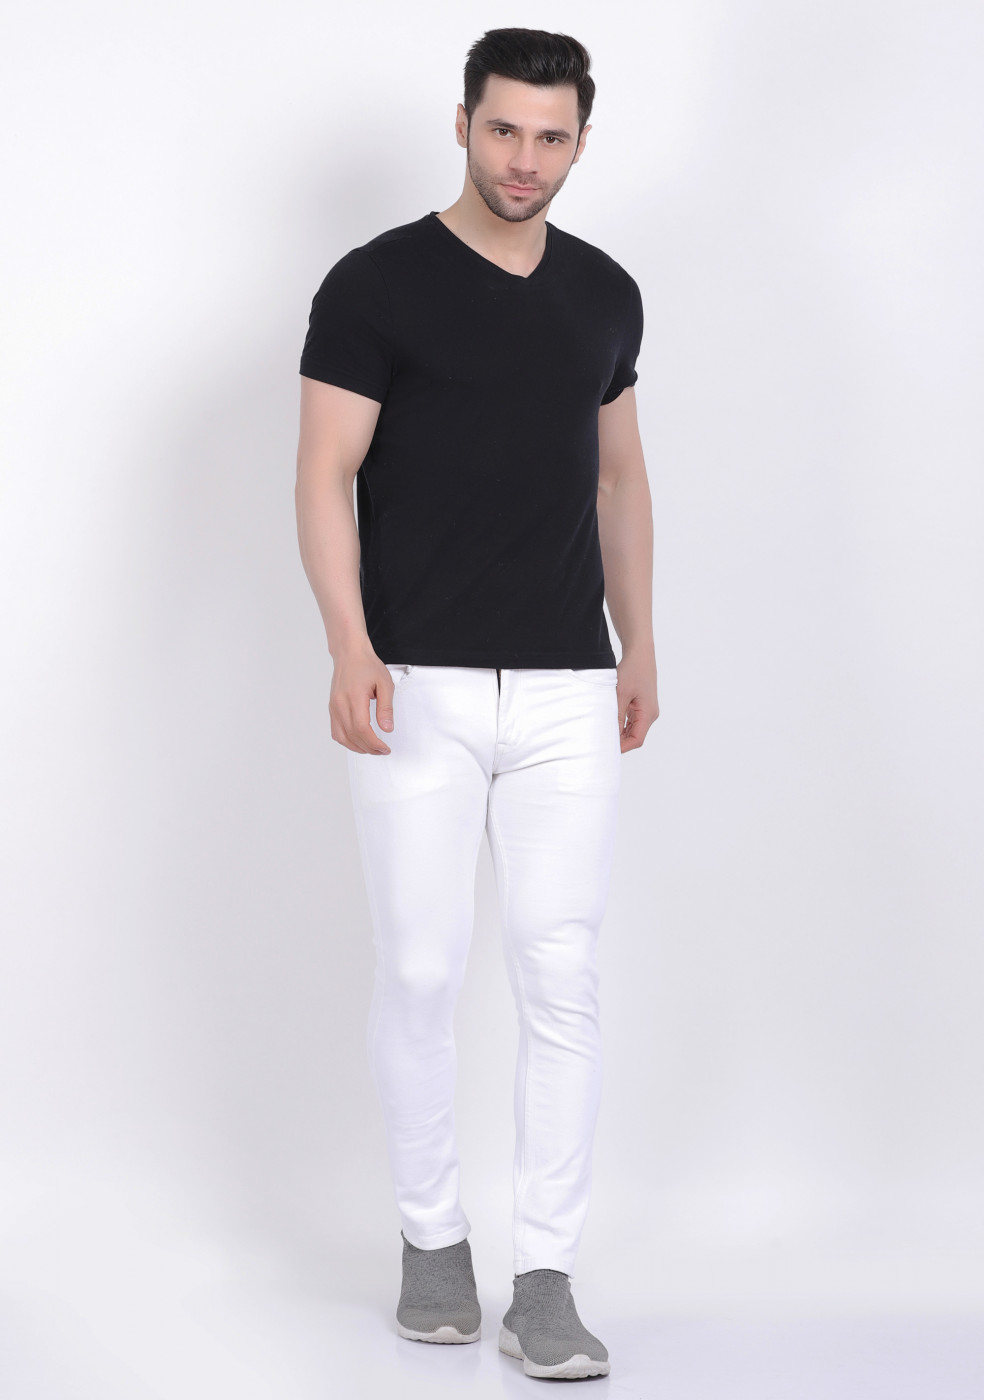 White Stretchable Cotton Jeans For Men